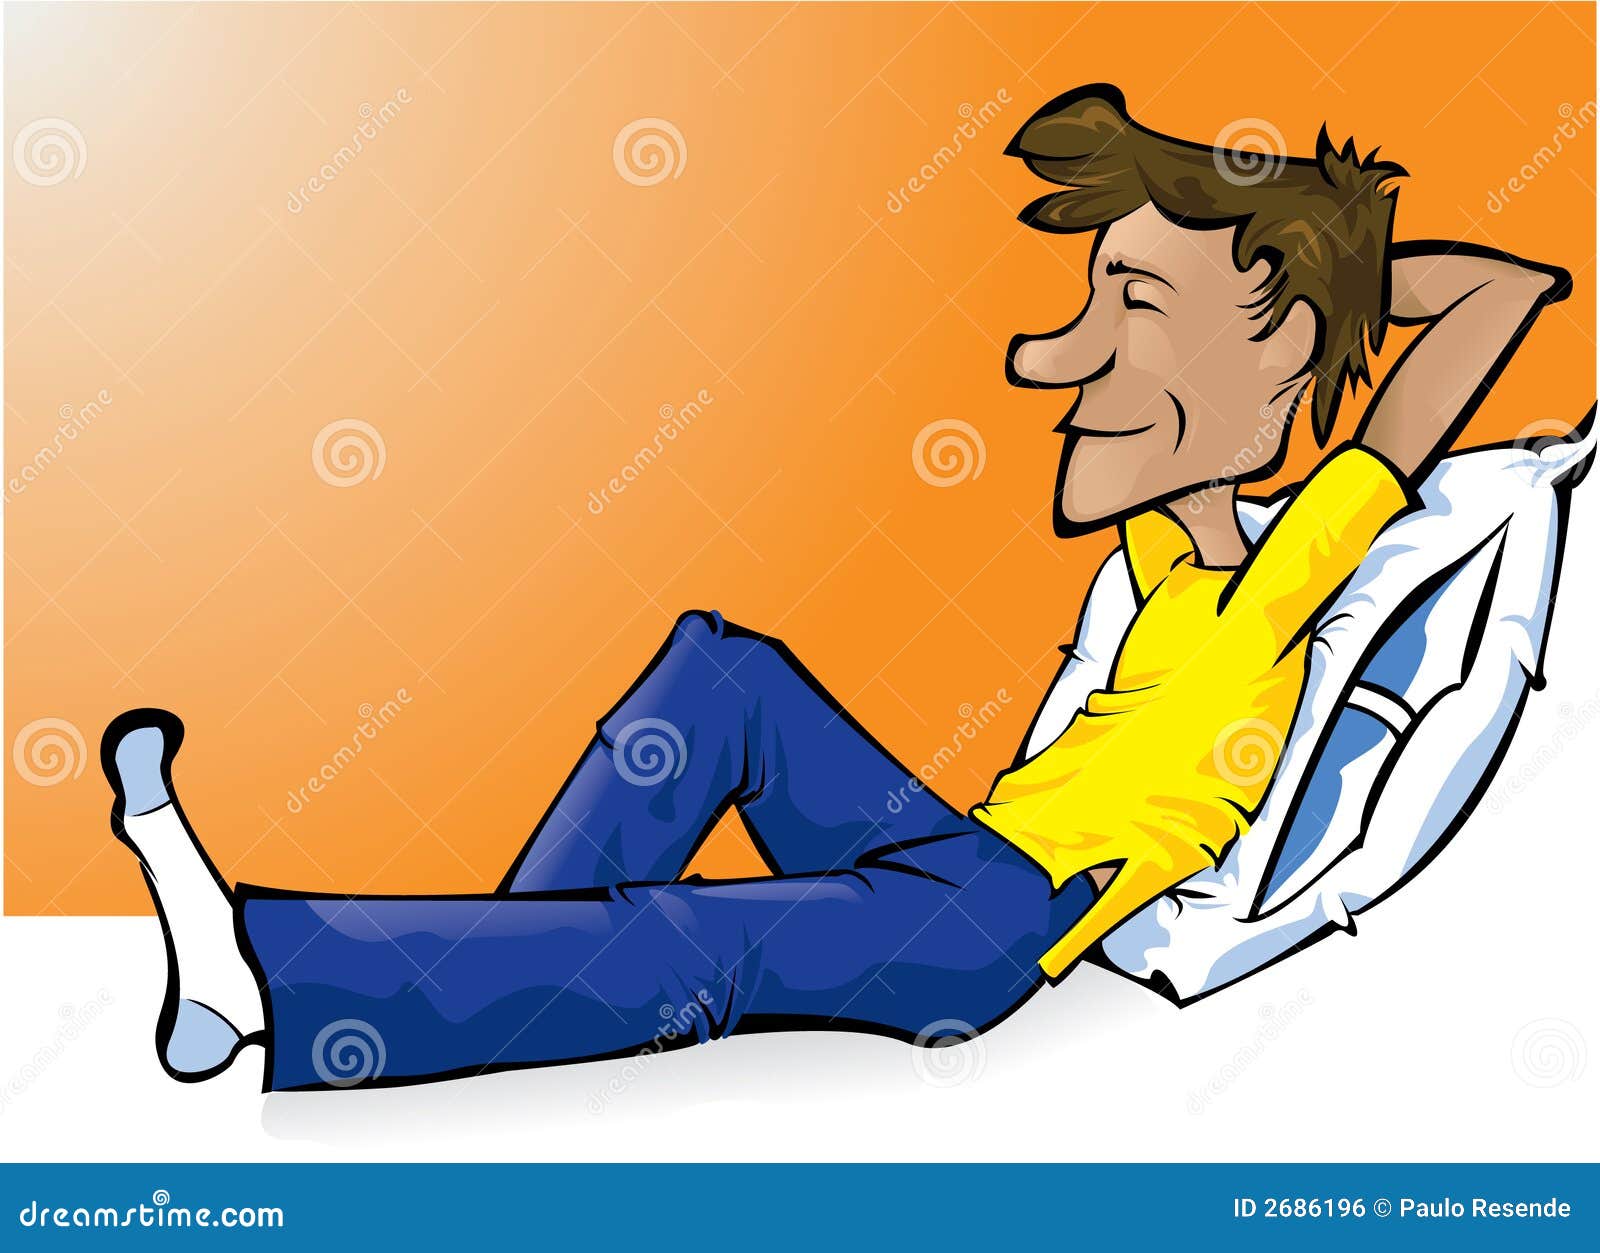 girl relaxing clipart - photo #31